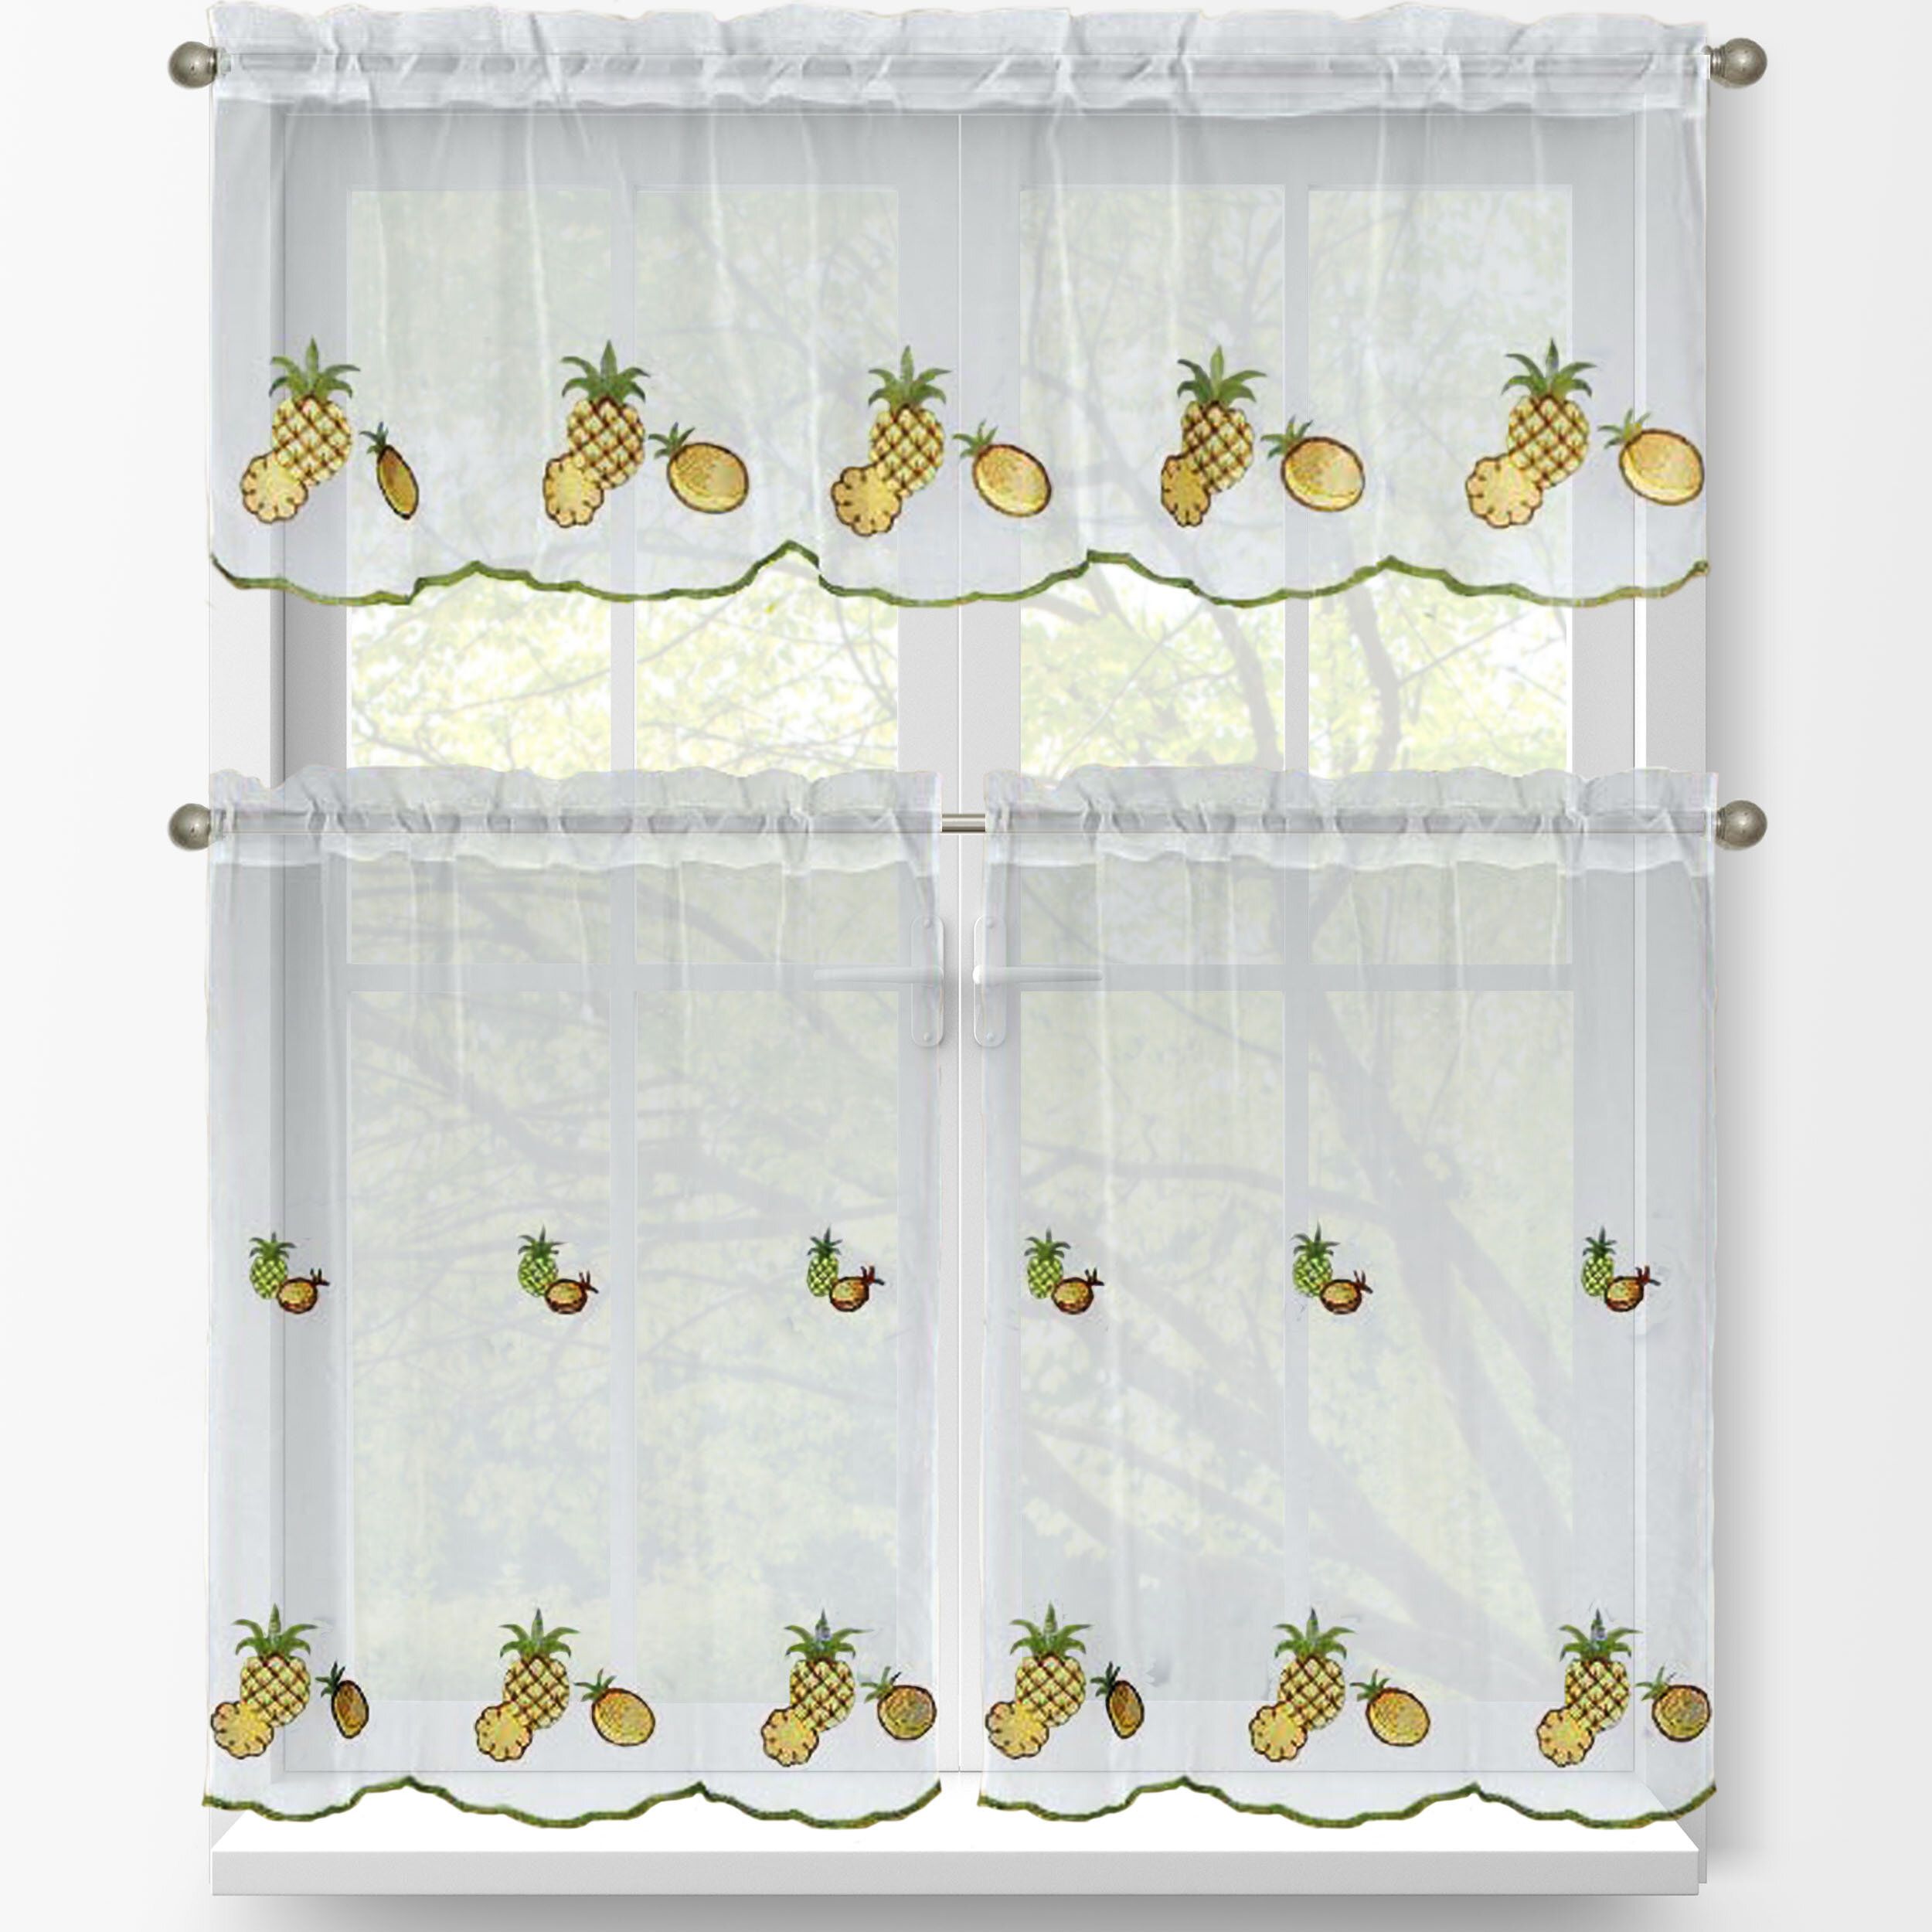 Pineapple 3 Piece Embroidered Kitchen Tier And Valance Set Intended For Kitchen Curtain Tiers (View 4 of 20)